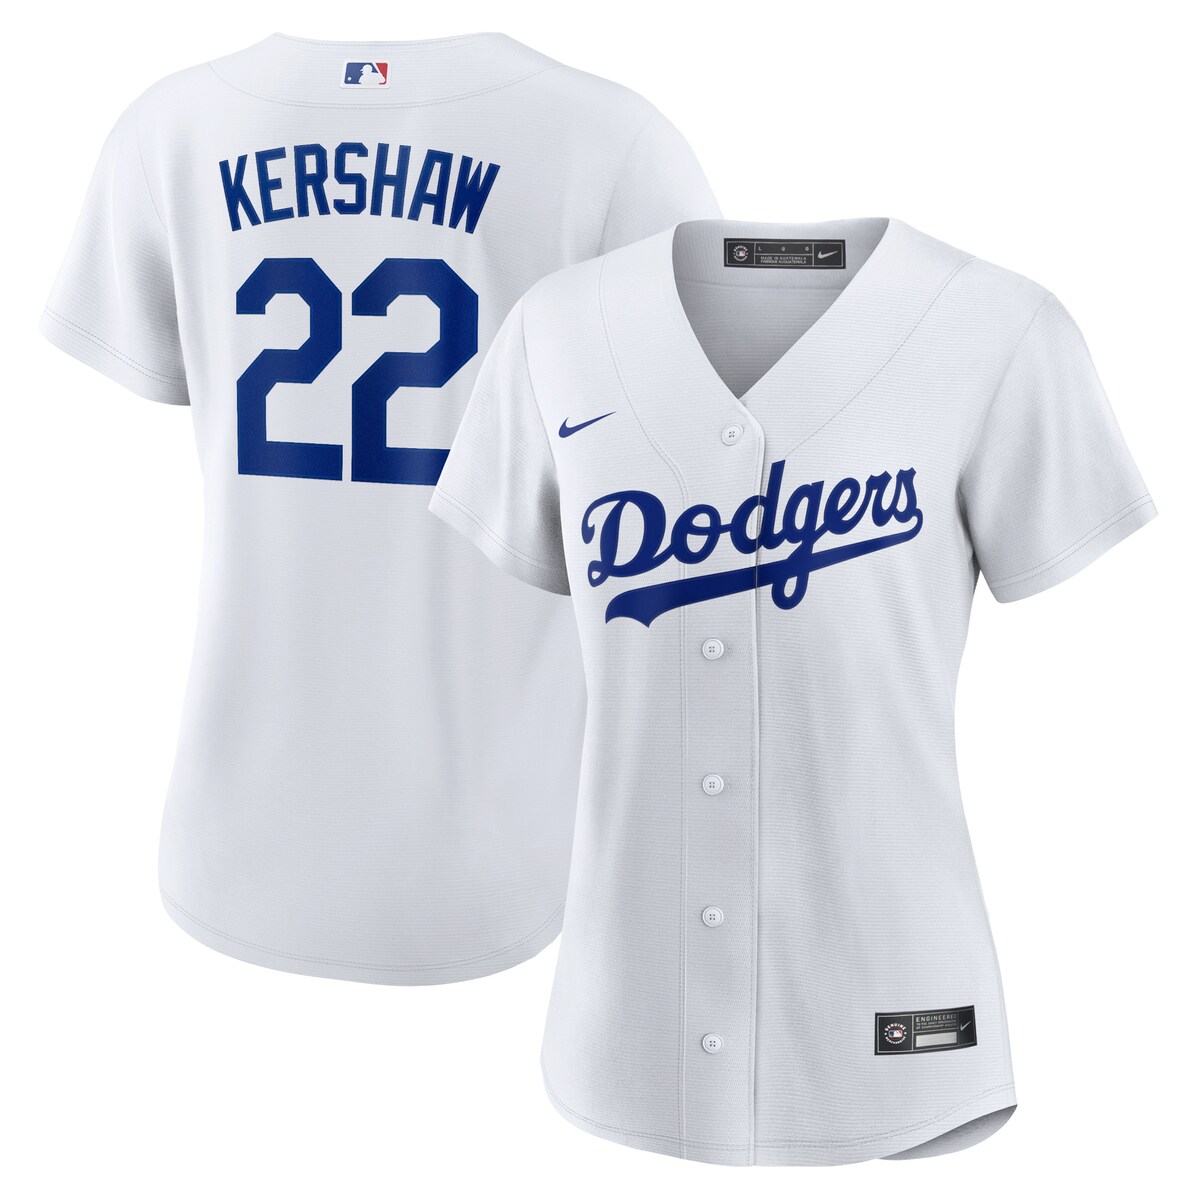 MLB ɥ㡼 쥤ȥ󡦥祦 ץꥫ ˥ե Nike ʥ ǥ ۥ磻 (Women's MLB Nike Official Replica Player Jersey)